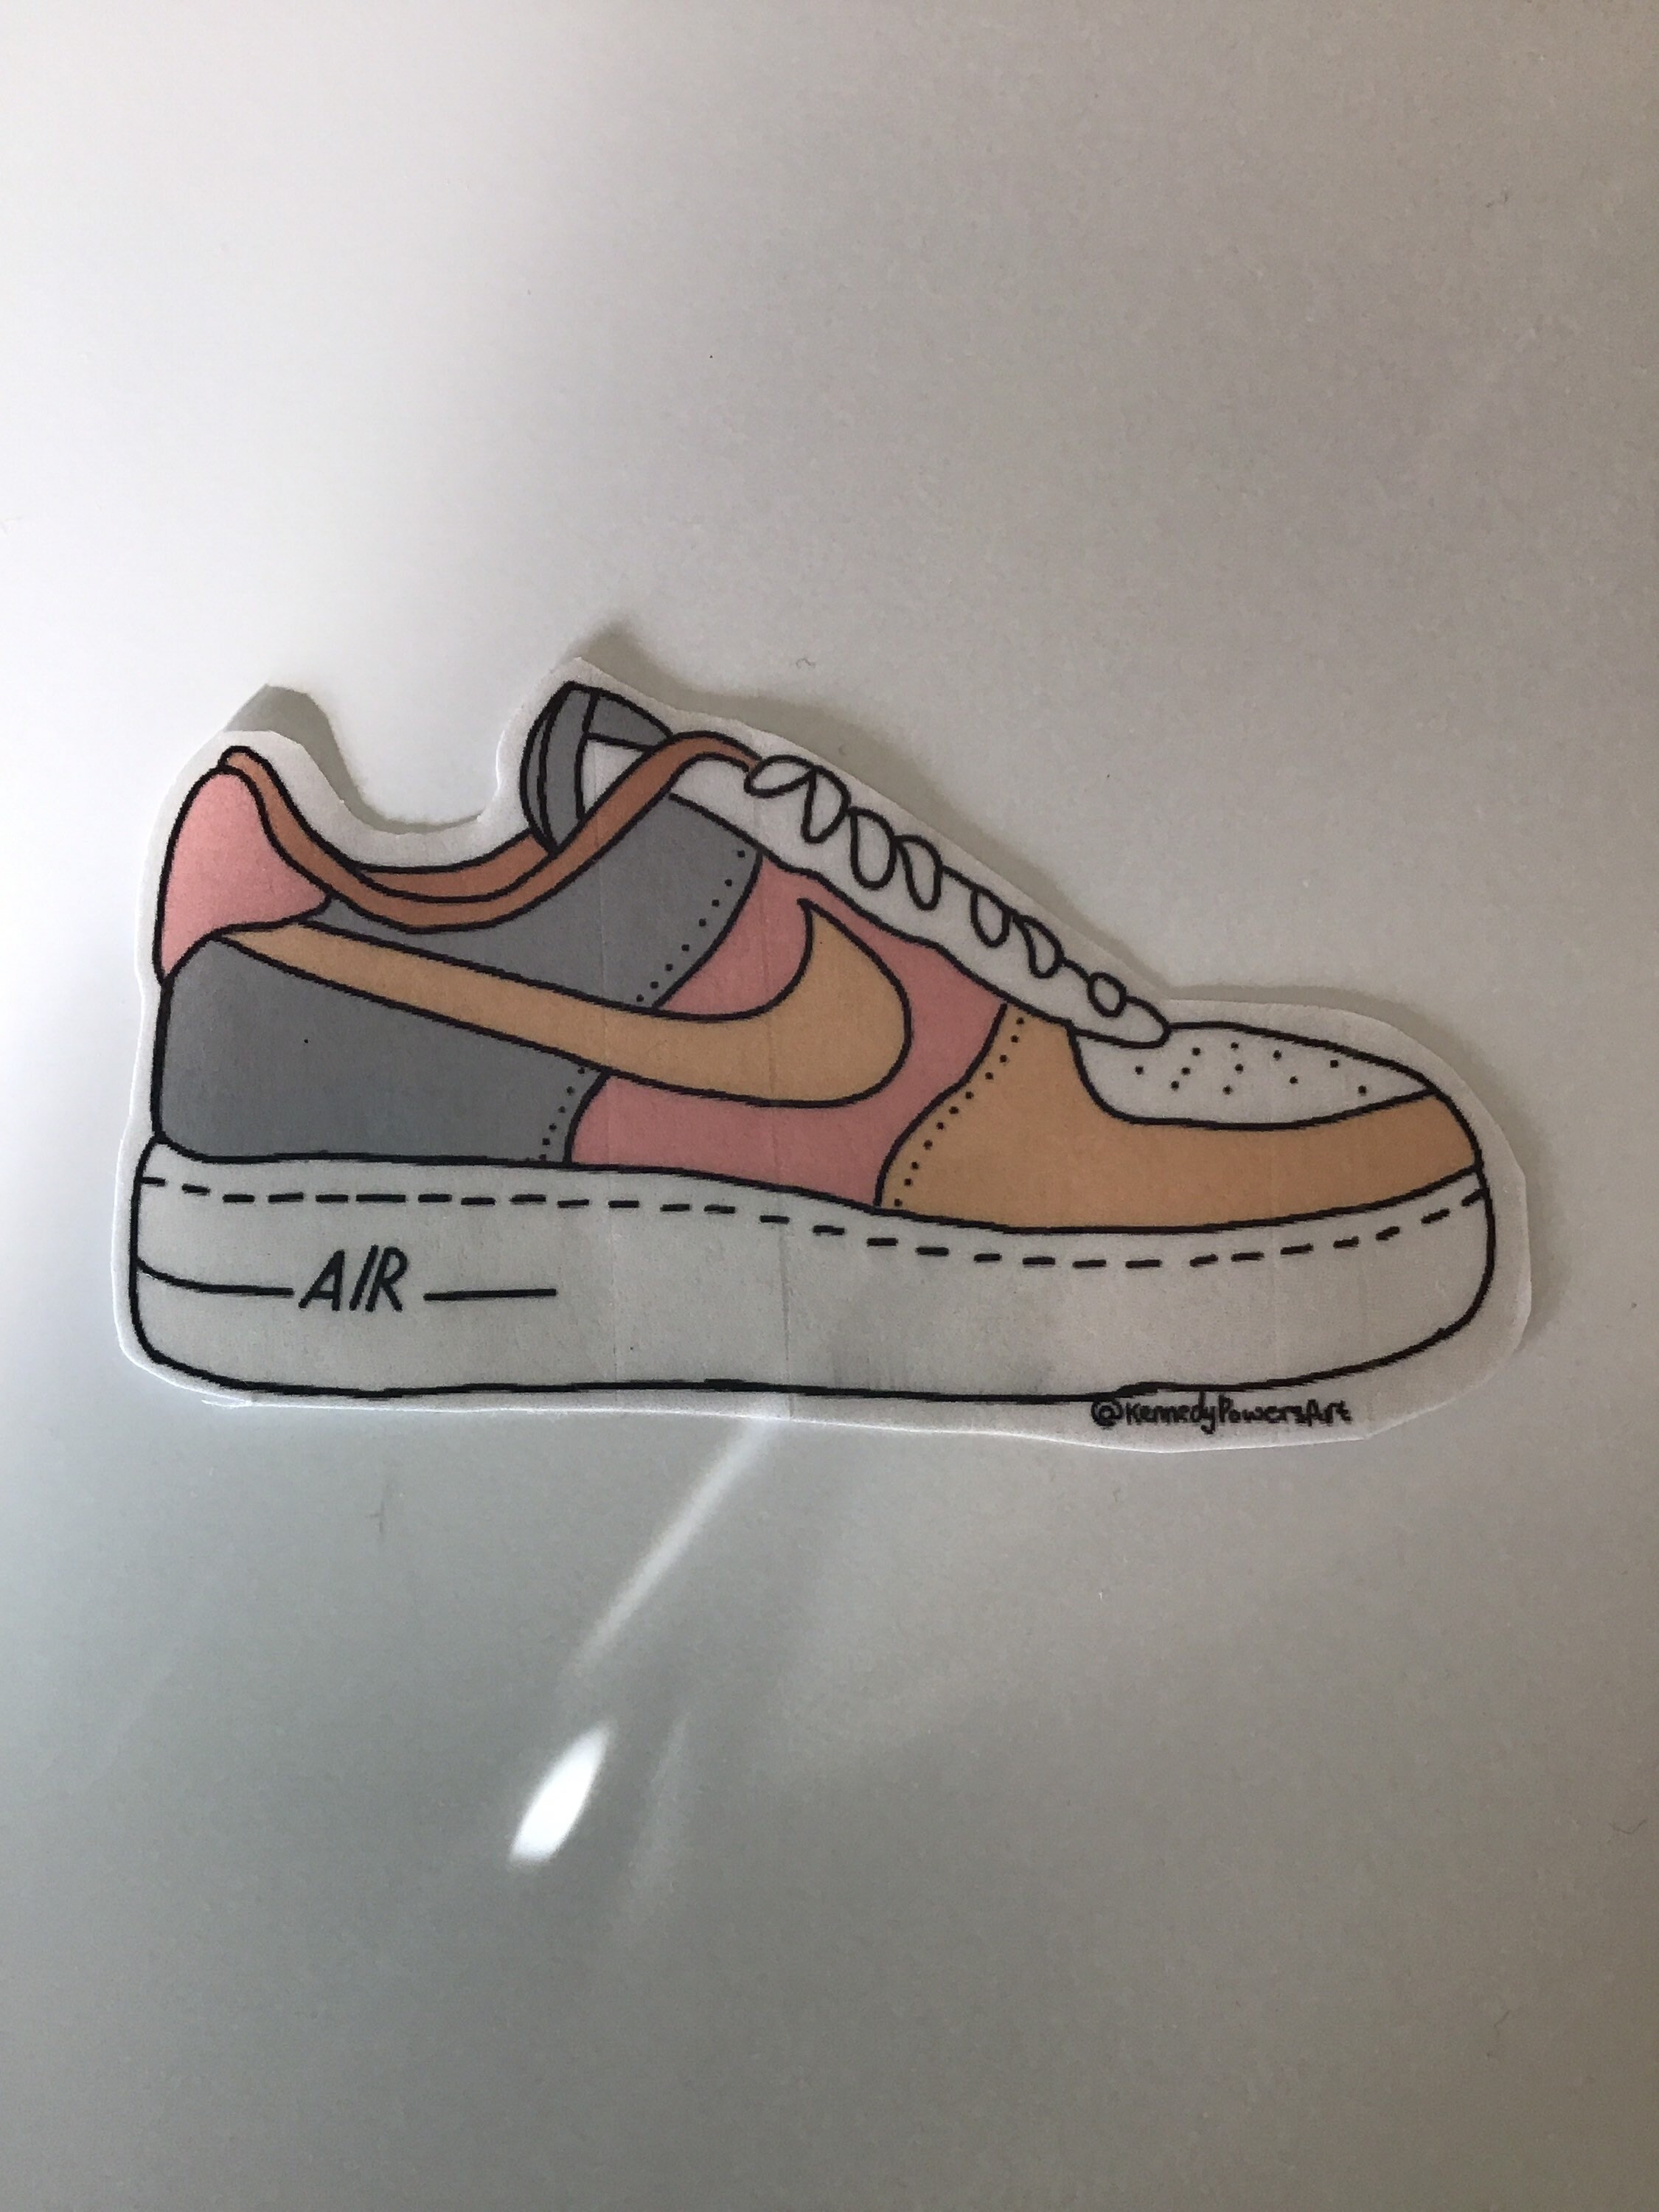 Air Force 1 glossy sticker | Etsy